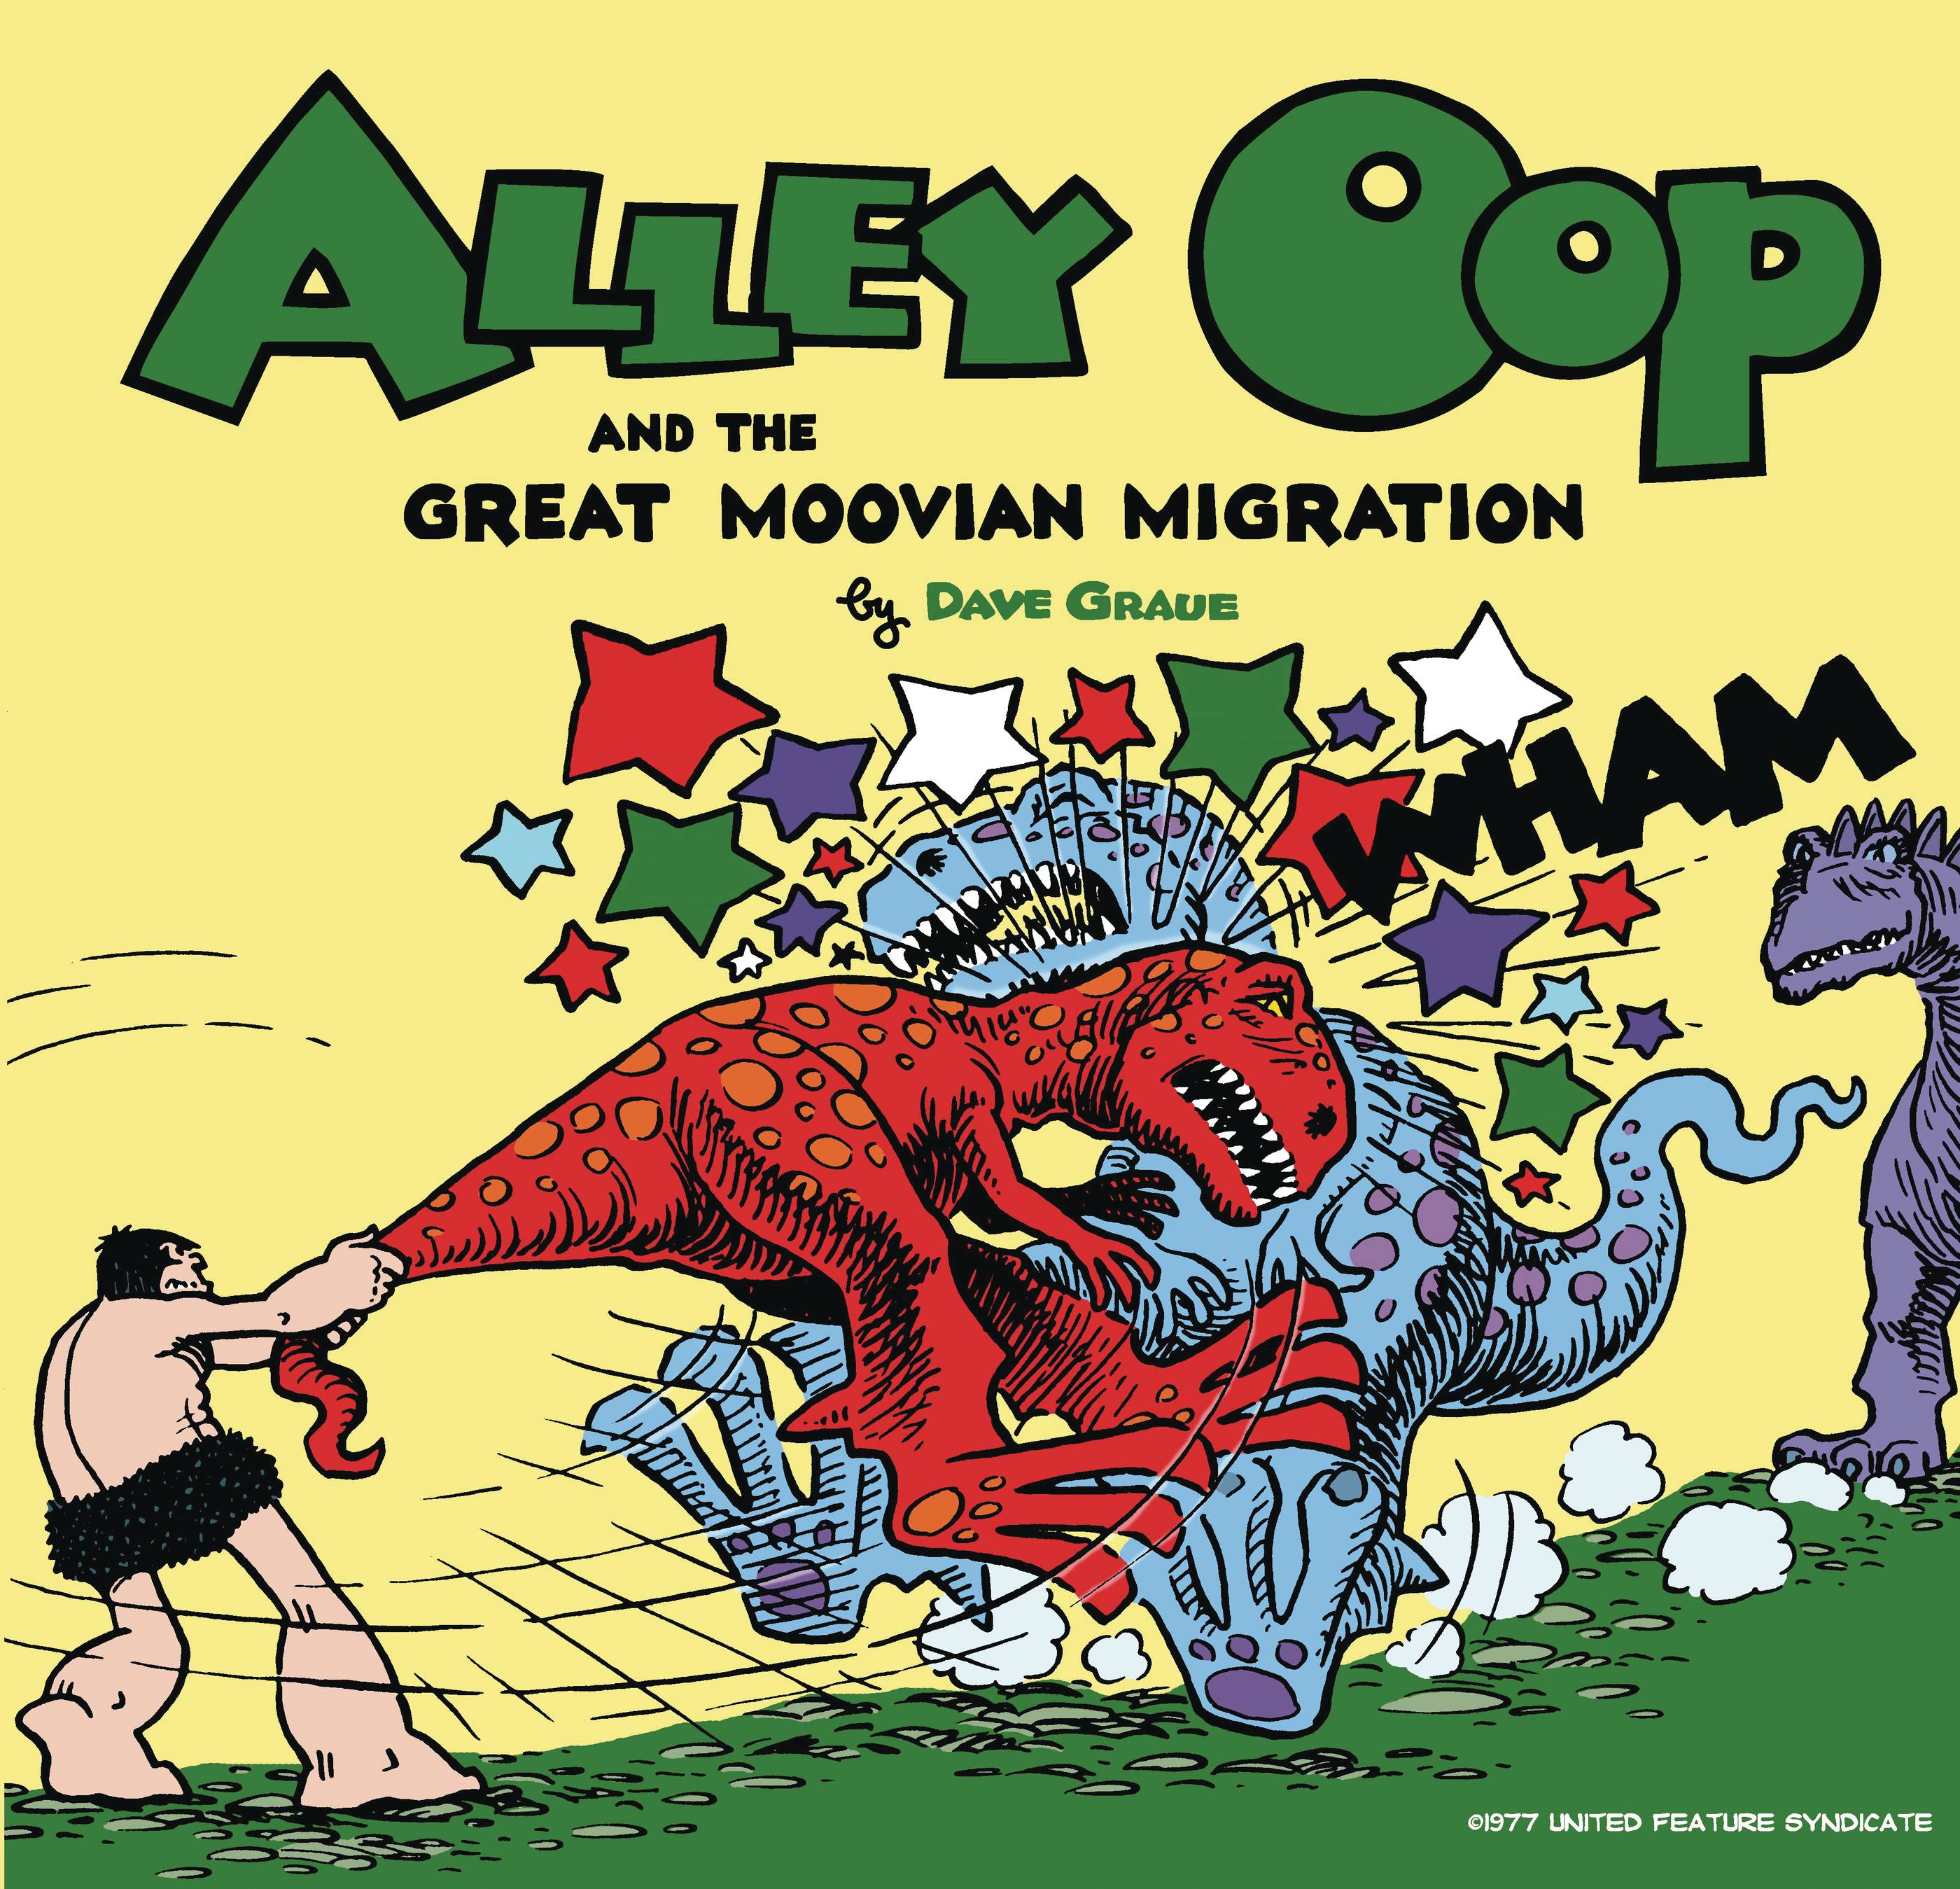 ALLEY OOP AND THE GREAT MOOVIAN MIGRATION #45